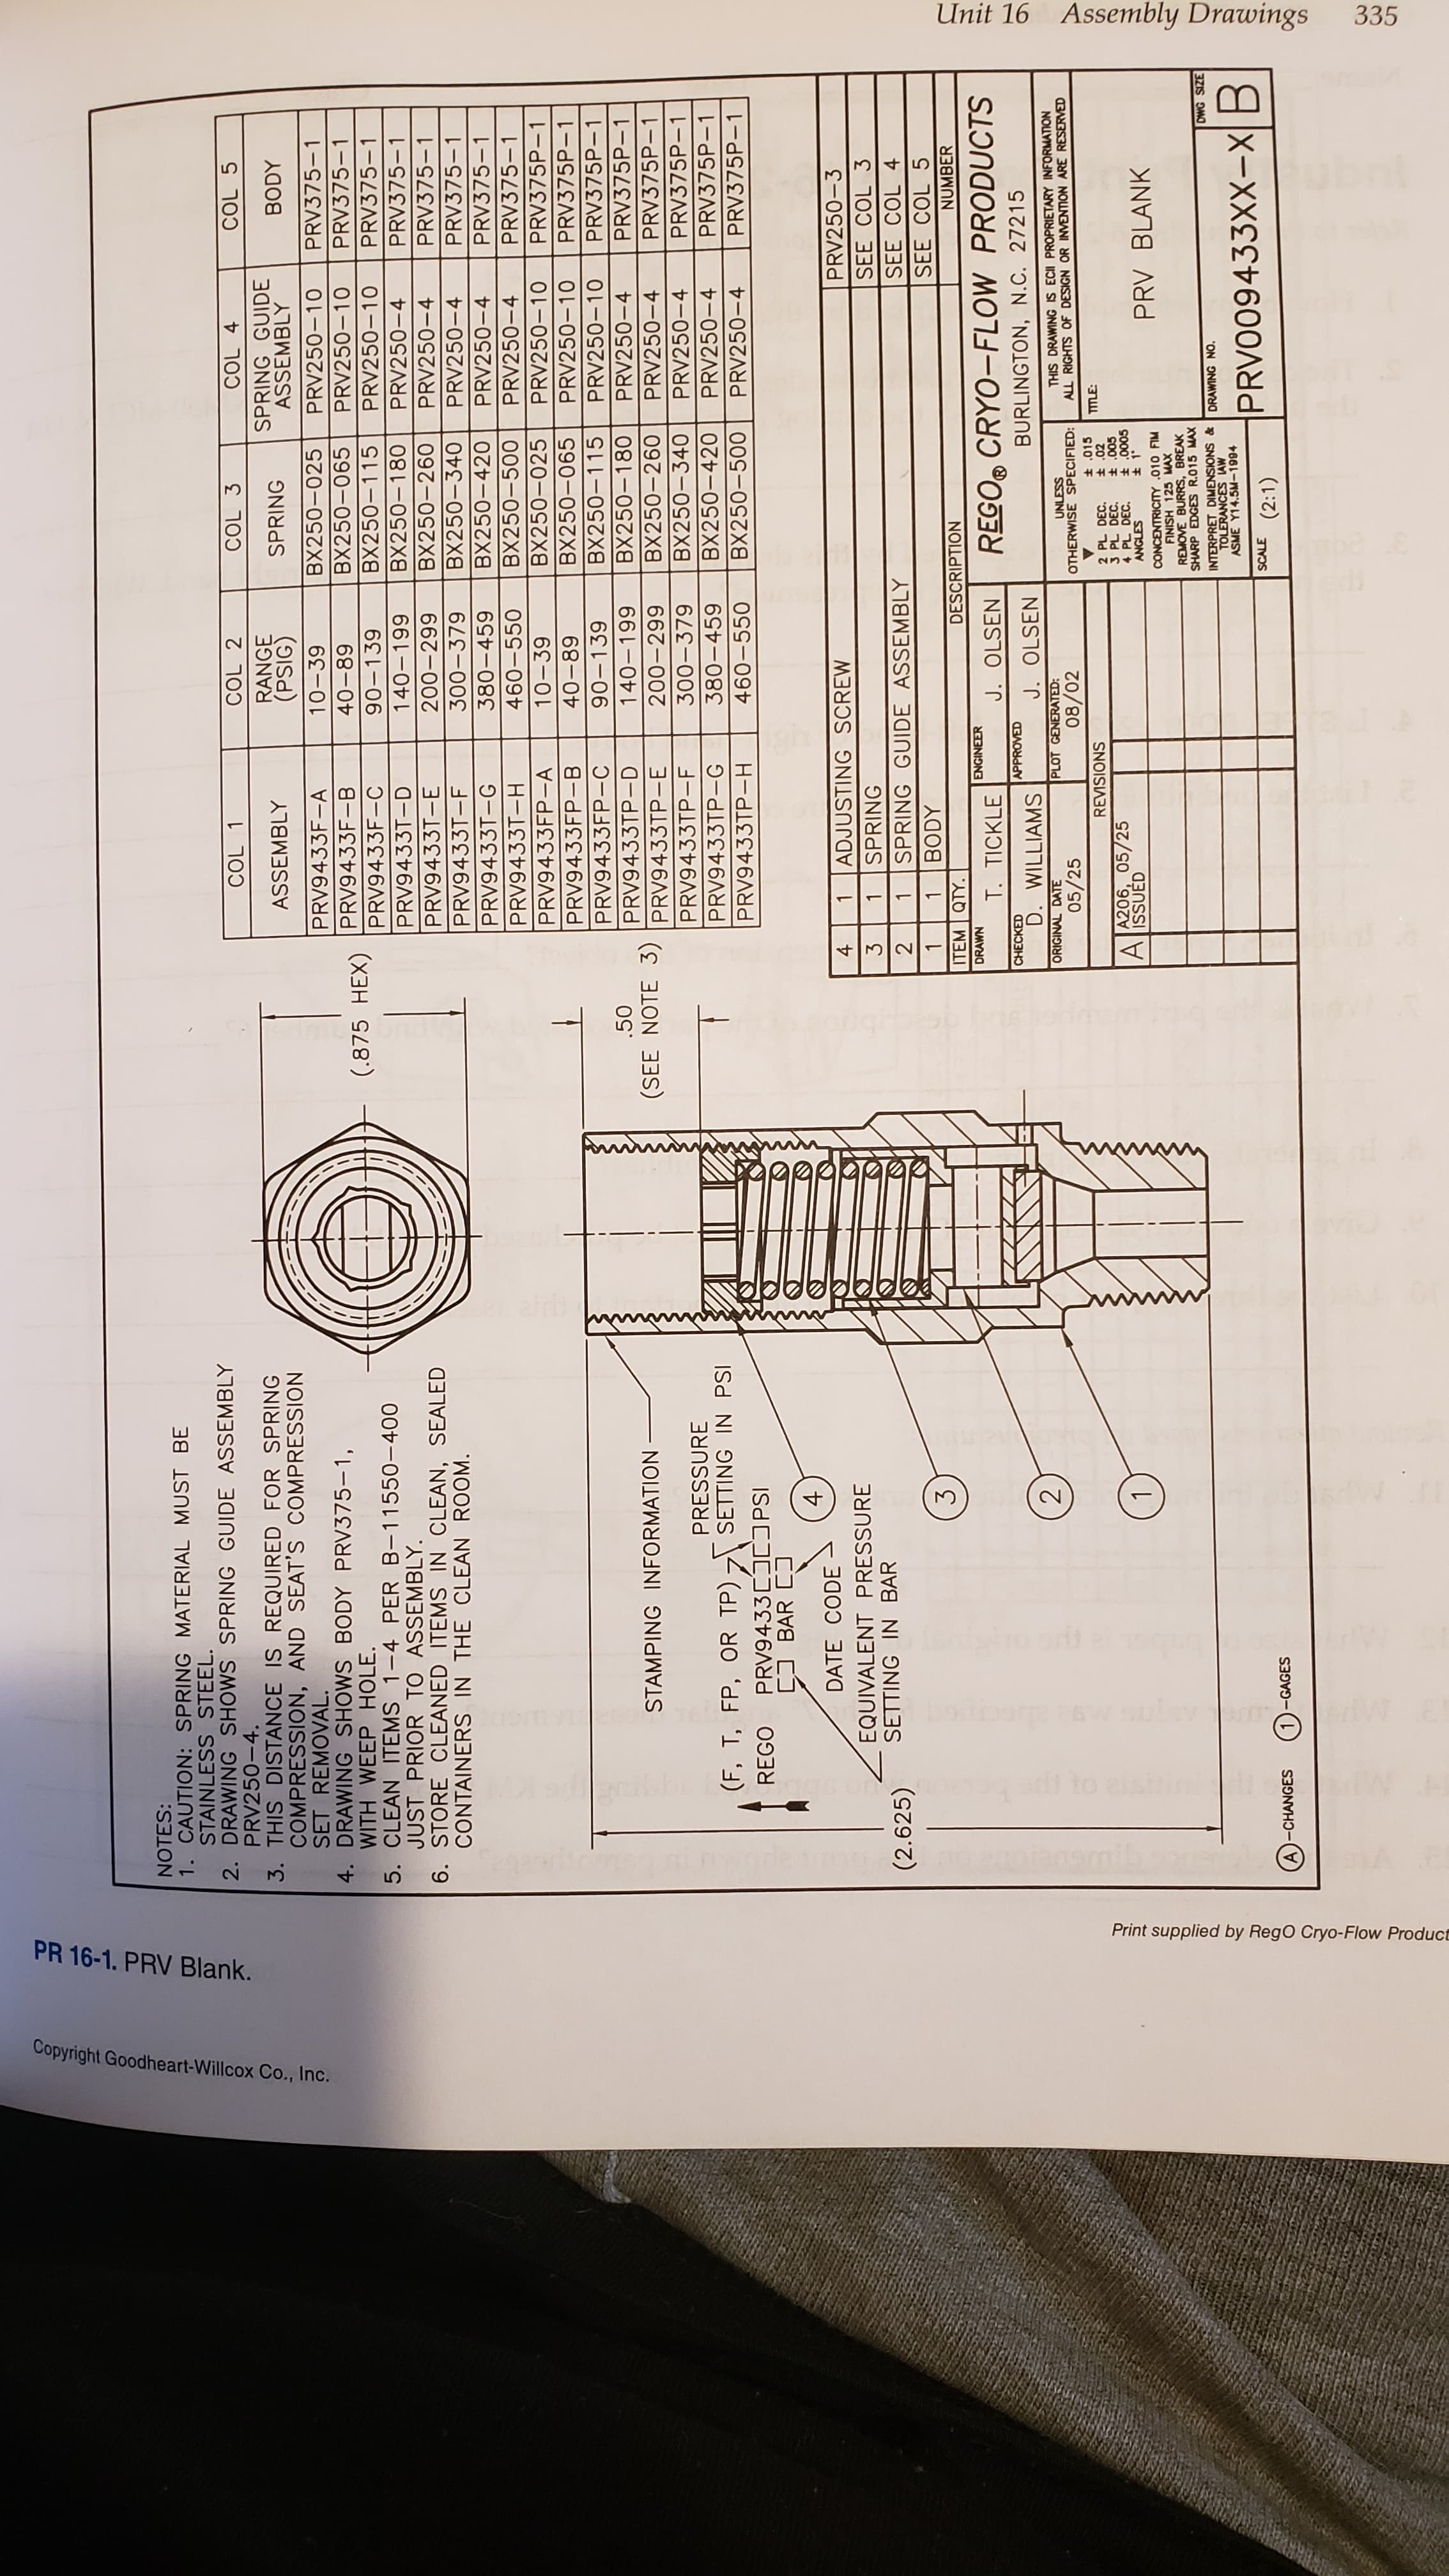 335
Assembly Drawings
Unit 16
www
Print supplied by RegO Cryo-Flow Product
PR 16-1. PRV Blank.
Copyright Goodheart-Willcox Co., Inc.
NOTES:
1. CAUTION: SPRING MATERIAL MUST BE
STAINLESS STEEL.
2. DRAWING SHOWS SPRING GUIDE ASSEMBLY
PRV250-4.
3. THIS DISTANCE IS REQUIRED FOR SPRING
COMPRESSION, AND SEAT'S COMPRESSION
SET REMOVAL.
4. DRAWING SHOWS BODY PRV375-1,
WITH WEEP HOLE.
5. CLEAN ITEMS 1-4 PER B-11550-400
COL 1
COL 2
COL 3
COL 4
COL 5
RANGE
(PSIG)
SPRING GUIDE
ASSEMBLY
ASSEMBLY
SPRING
BODY
BX250-025
BX250-065
BX250-115
BX250-180
PRV9433F-A
10-39
PRV250-10
PRV375-1
PRV9433F-B
40-89
PRV250-10
PRV375-1
(.875 HEX)
PRV9433F-C
90-139
PRV250-10
PRV375-1
140-199
JUST PRIOR TO ASSEMBLY.
6. STORE CLEANED ITEMS IN CLEAN, SEALED
CONTAINERS IN THE CLEAN ROOM.
PRV9433T-D
PRV250-4
PRV375-1
PRV9433T-E
PRV9433T-F
PRV9433T-G
BX250-260
BX250-340
BX250-420
BX250-500
BX250-025
BX250-065
BX250-115
BX250-180
BX250-260
66-00M
200-299
PRV250-4
PRV375-1
300-379
PRV250-4
PRV375-
380-459
PRV250-4
PRV375-1
PRV9433T-H
460-550
PRV250-4
PRV375-1
PRV9433FP-A
10-39
PRV250-10
PRV375P-1
PRV9433FP-B
40-89
PRV250-10
PRV375P-1
PRV9433FP-C
90-139
PRV250-10
PRV375P-1
0
(SEE NOTE 3)
PRV9433TP-D
140-199
PRV250-4
PRV375P-1
STAMPING INFORMATION
PRV9433TP -E
PRV250-4
PRV375P-1
BX250-340
BX250-420
BX250-500
PRESSURE
PRV9433TP-F
300-379
PRV250-4
PRV375P-1
(F, T, FP, OR TP)SETTING IN PSI
REGO PRV9433 PS
C BAR C
PRV9433TP-G
380-459
PRV250-4
PRV375P-1
PRV9433TP-H
460-550
PRV250-4
PRV375P-1
DATE CODE
EQUIVALENT PRESSURE
SETTING IN BAR
1 ADJUSTING SCREW
PRV250-3
3
SPRING
SEE COL 3
(2.625)
2
SPRING GUIDE ASSEMBLY
SEE COL 4
3
BODY
SEE COL 5
ITEM QTY.
DESCRIPTION
NUMBER
DRAWN
ENGINEER
T. TICKLE
REGO CRYO-FLOW PRODUCTS
J. OLSEN
CHECKED
APPROVED
D. WILLIAMS
J. OLSEN
BURLINGTON, N.C. 27215
THIS DRAWING IS ECII PROPRIETARY INFORMATION
ALL RIGHTS OF DESIGN OR INVENTION ARE RESERVED
ORIGINAL DATE
PLOT GENERATED:
05/25
08/02
UNLESS
OTHERWISE SPECIFIED:
t .015
2 PL DEC. .02
3 PL DEC. t 005
REVISIONS
TITLE
A206, 05/25
ISSUED
ANGLES
00 30
PRV BLANK
CONCENTRICITY .010 FIM
FINISH 125 MAX
REMOVE BURRS, BREAK
SHARP EDGES R.015 MAX
INTERPRET DIMENSIONS&
TOLERANCESAW
ASME Y14.5M-1994
DRAWING NO.
PRVO09433XX-XB
SCALE
-CHANGES
-GAGES
(2:1)
